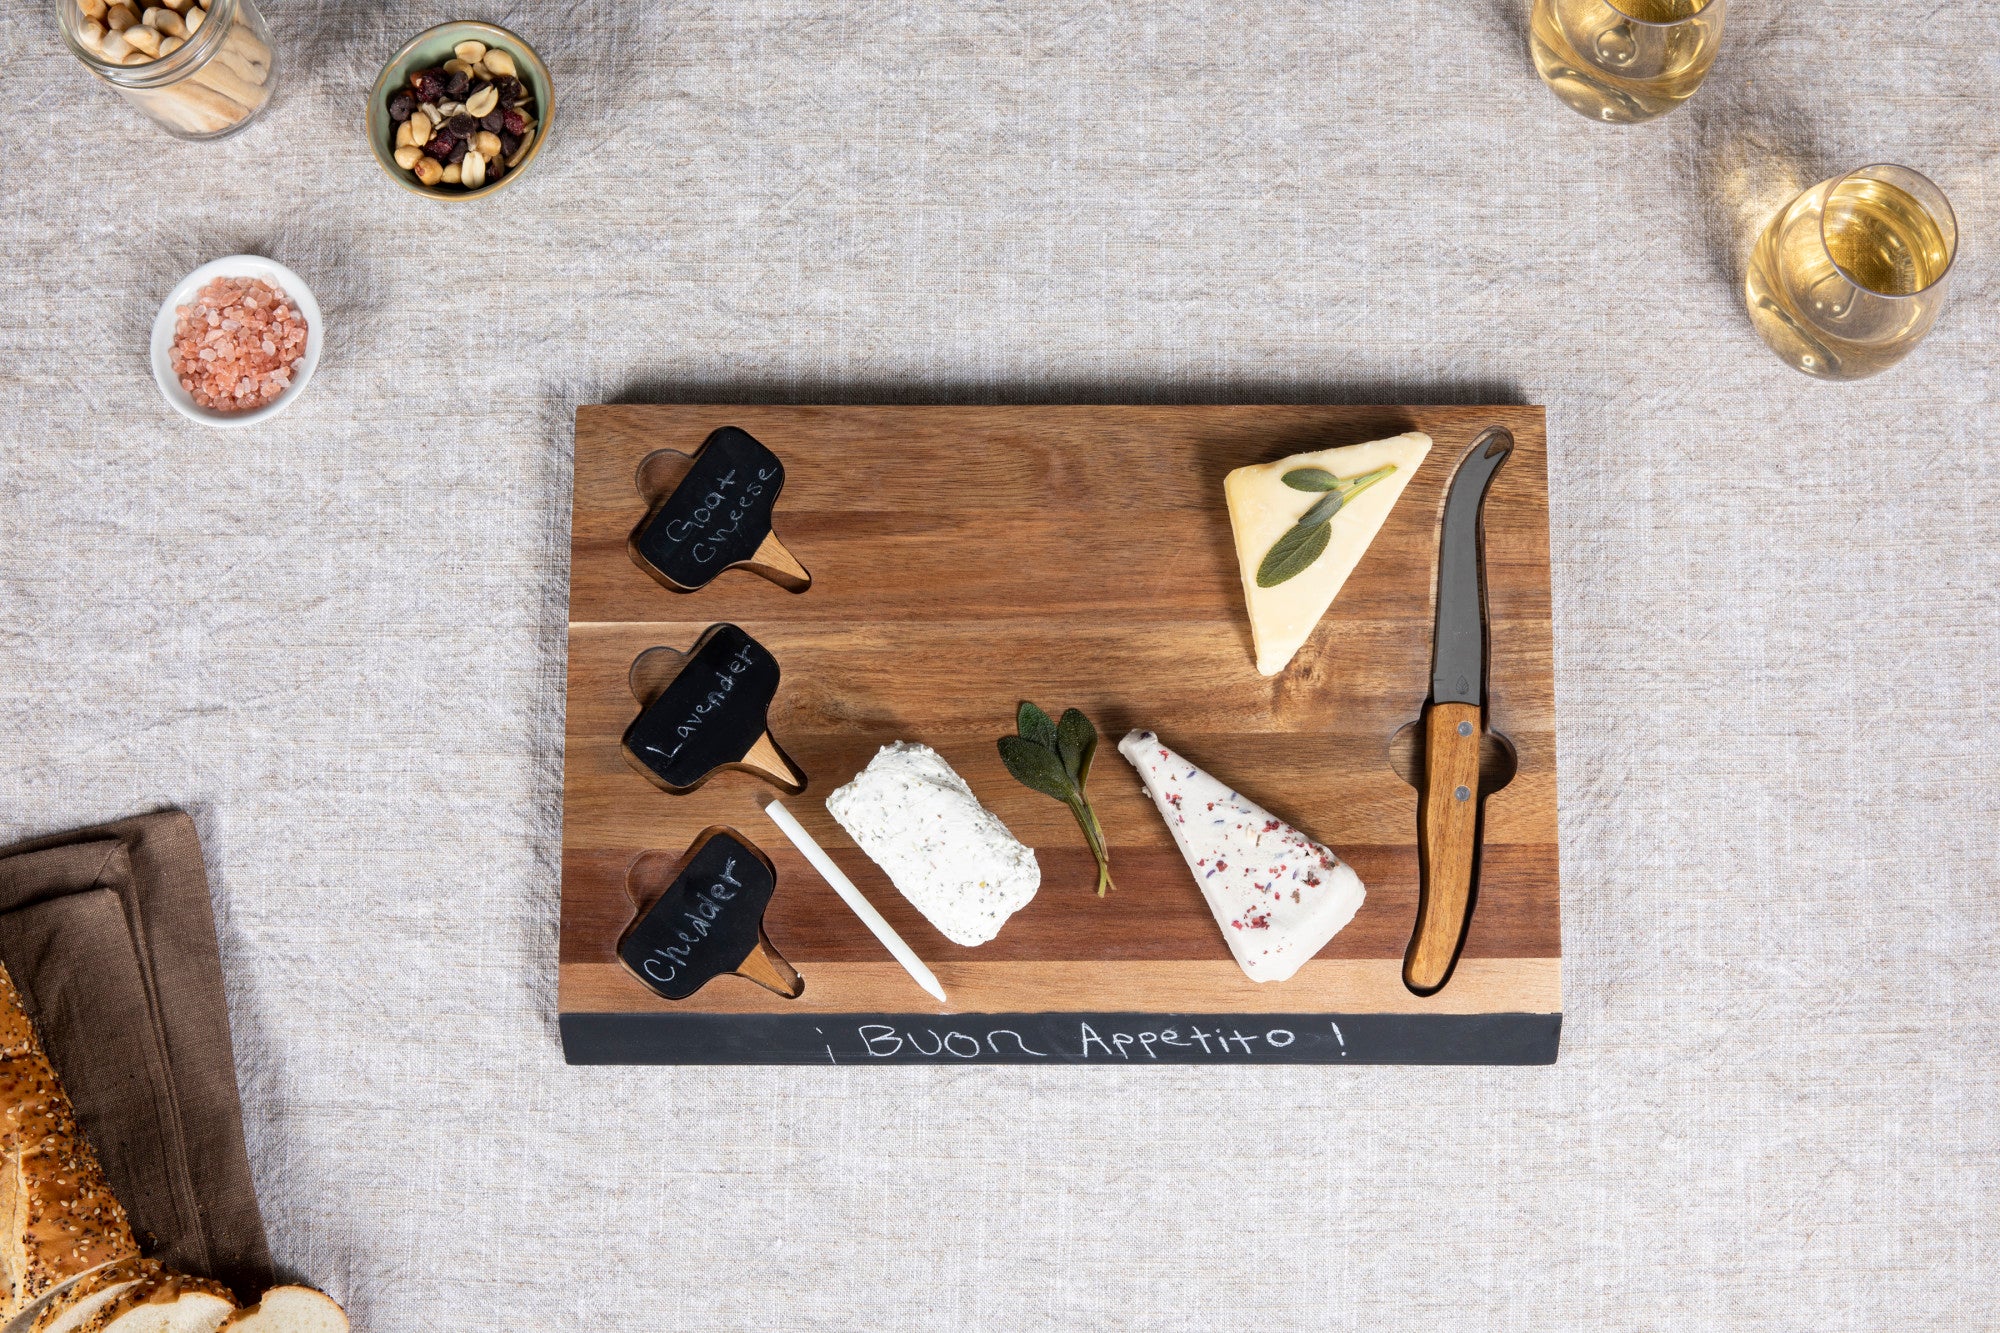 New Orleans Saints - Delio Acacia Cheese Cutting Board & Tools Set